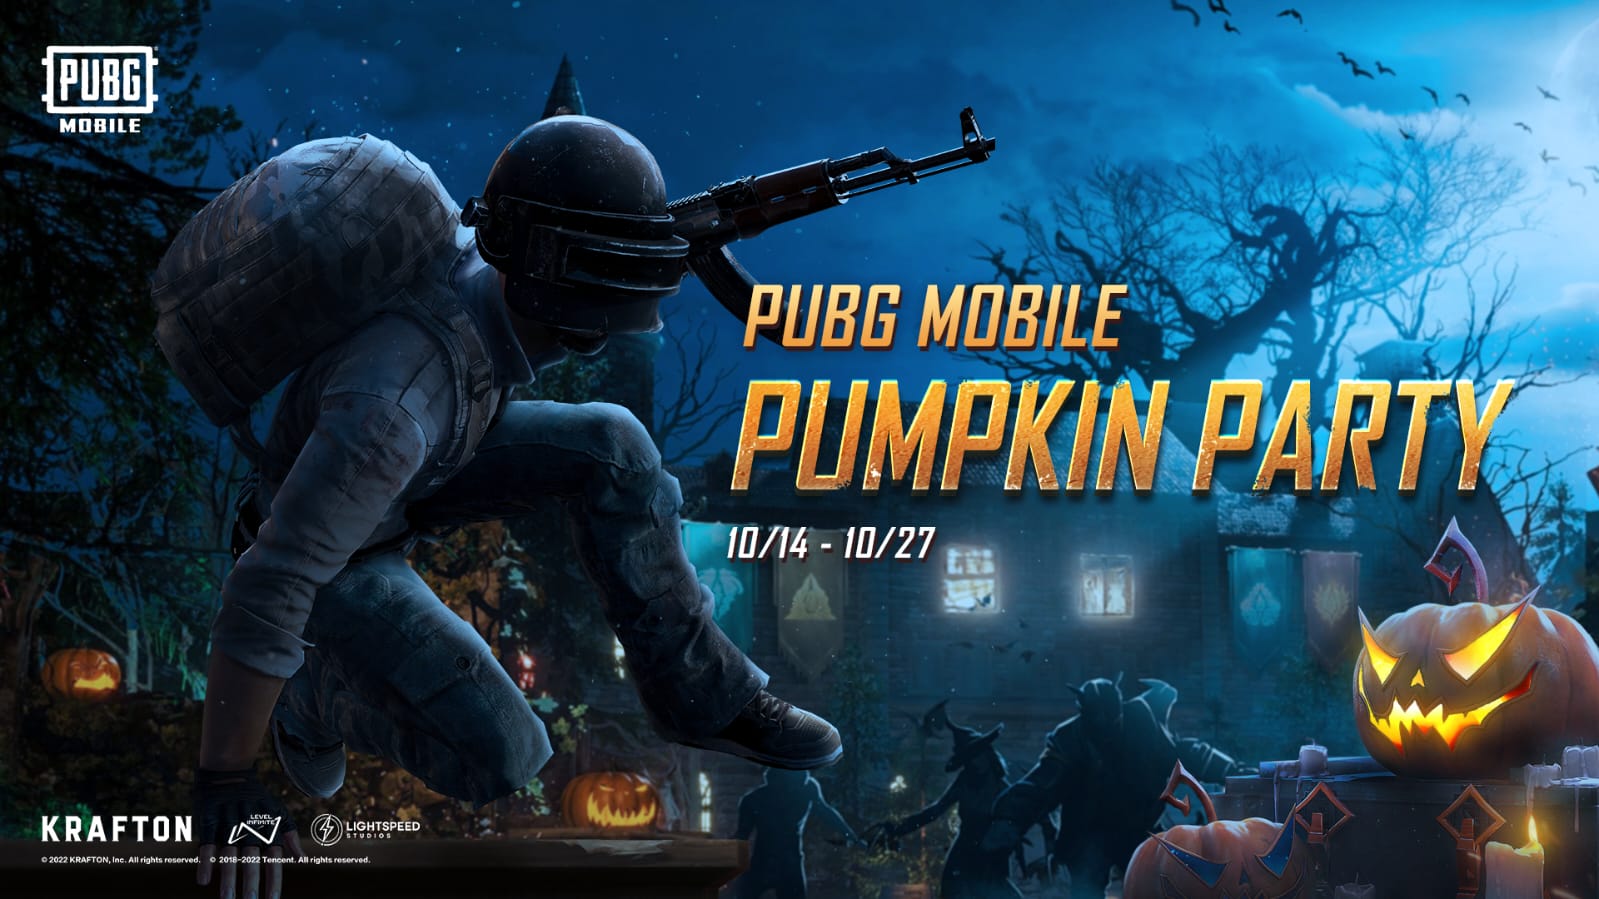 PUBG Mobile Pumpkin Party Event Share your real-life pumpkin-themed decorations to win some UC